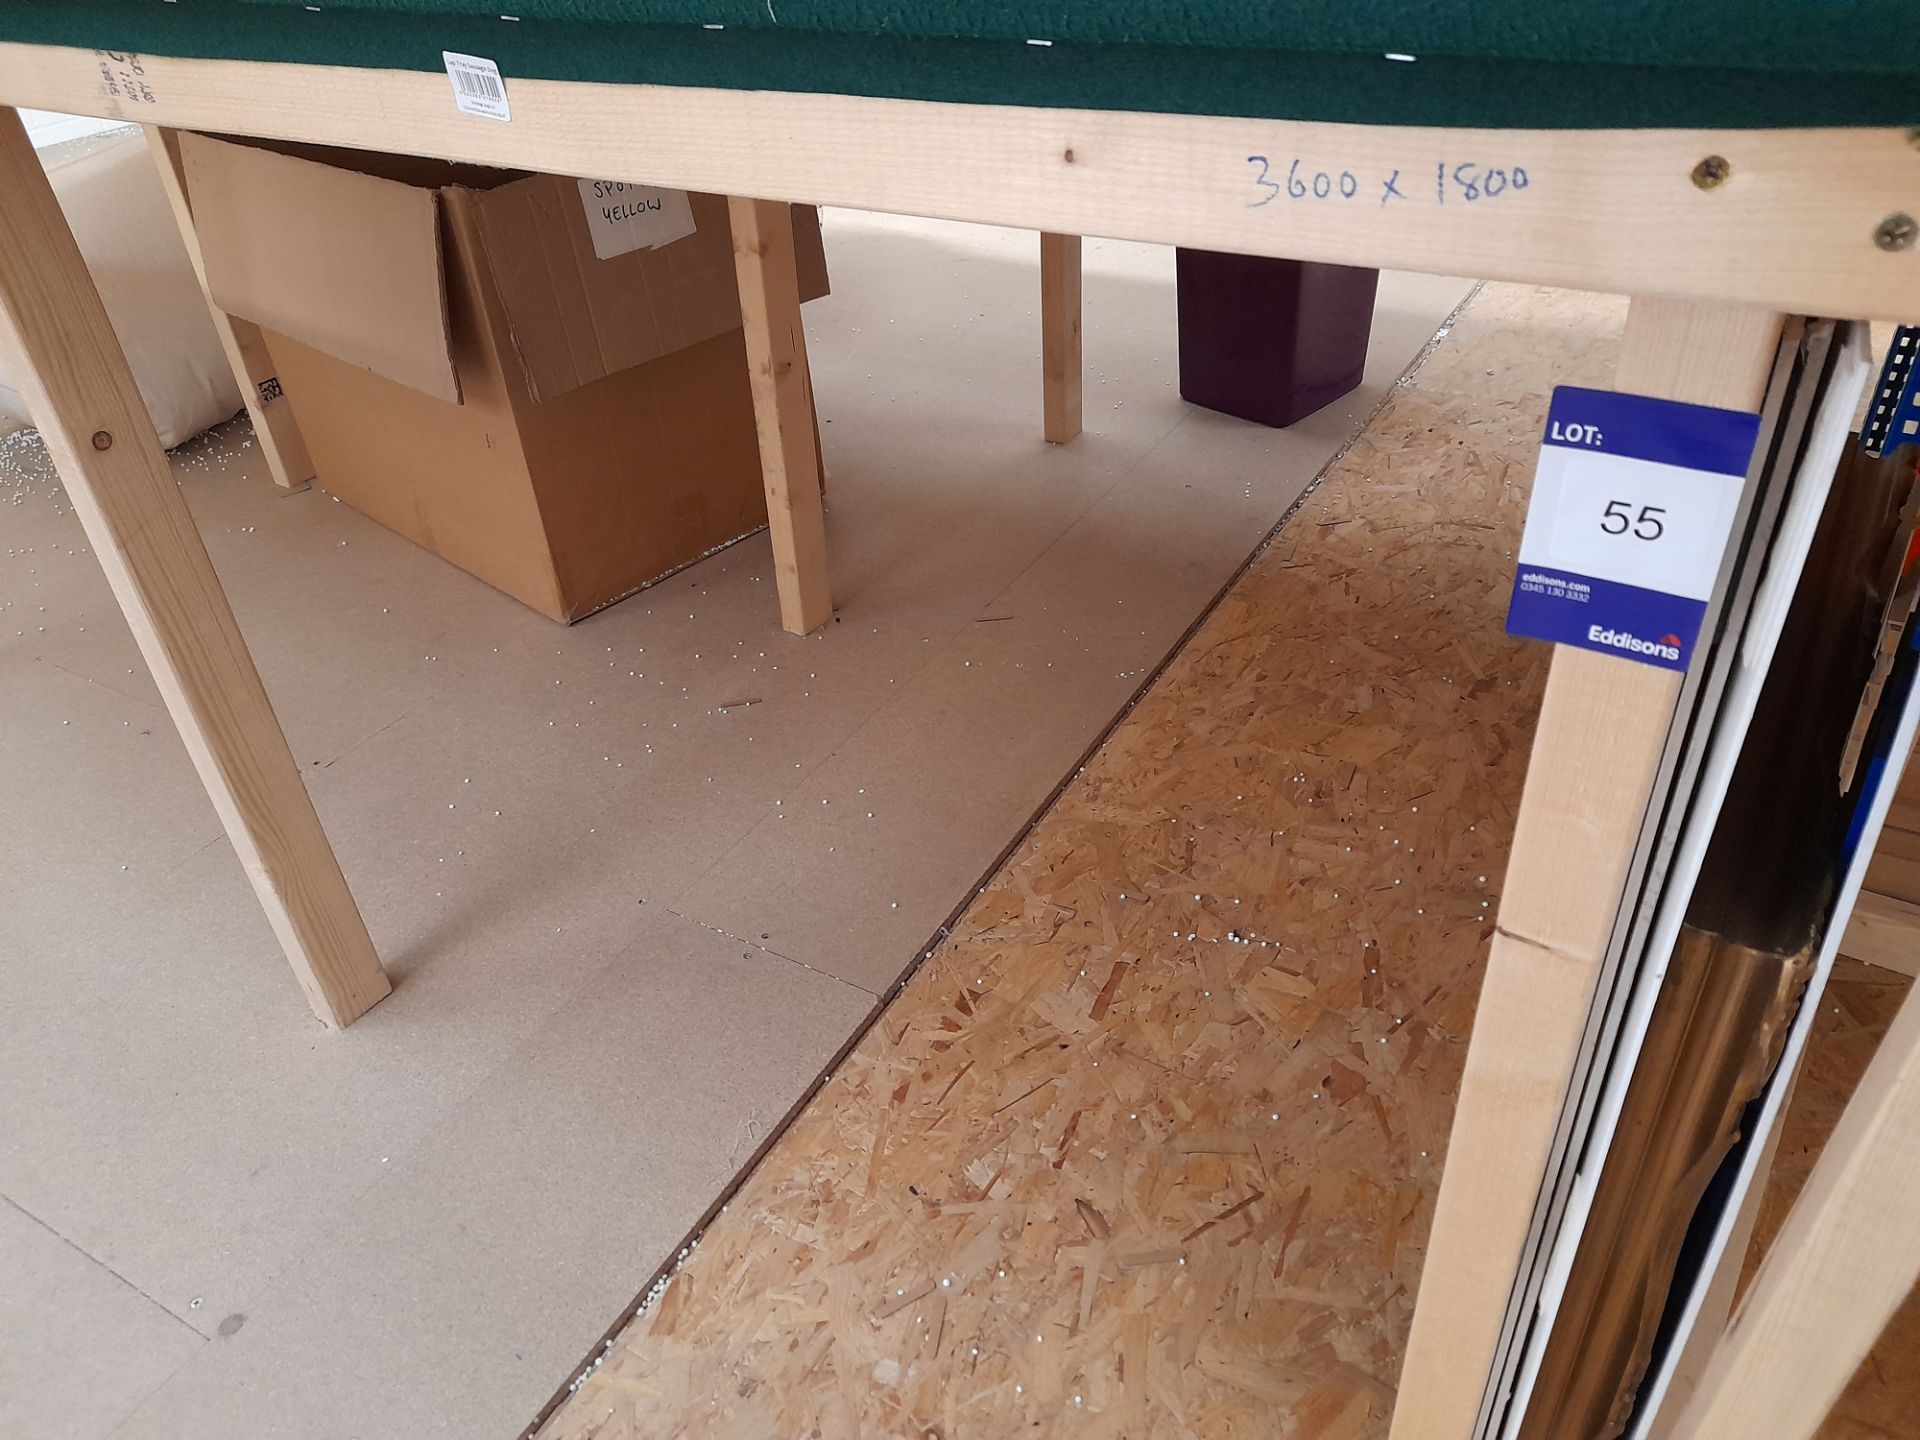 Wooden workbench to mezzanine (Approx. 3600x1800) - Image 2 of 2